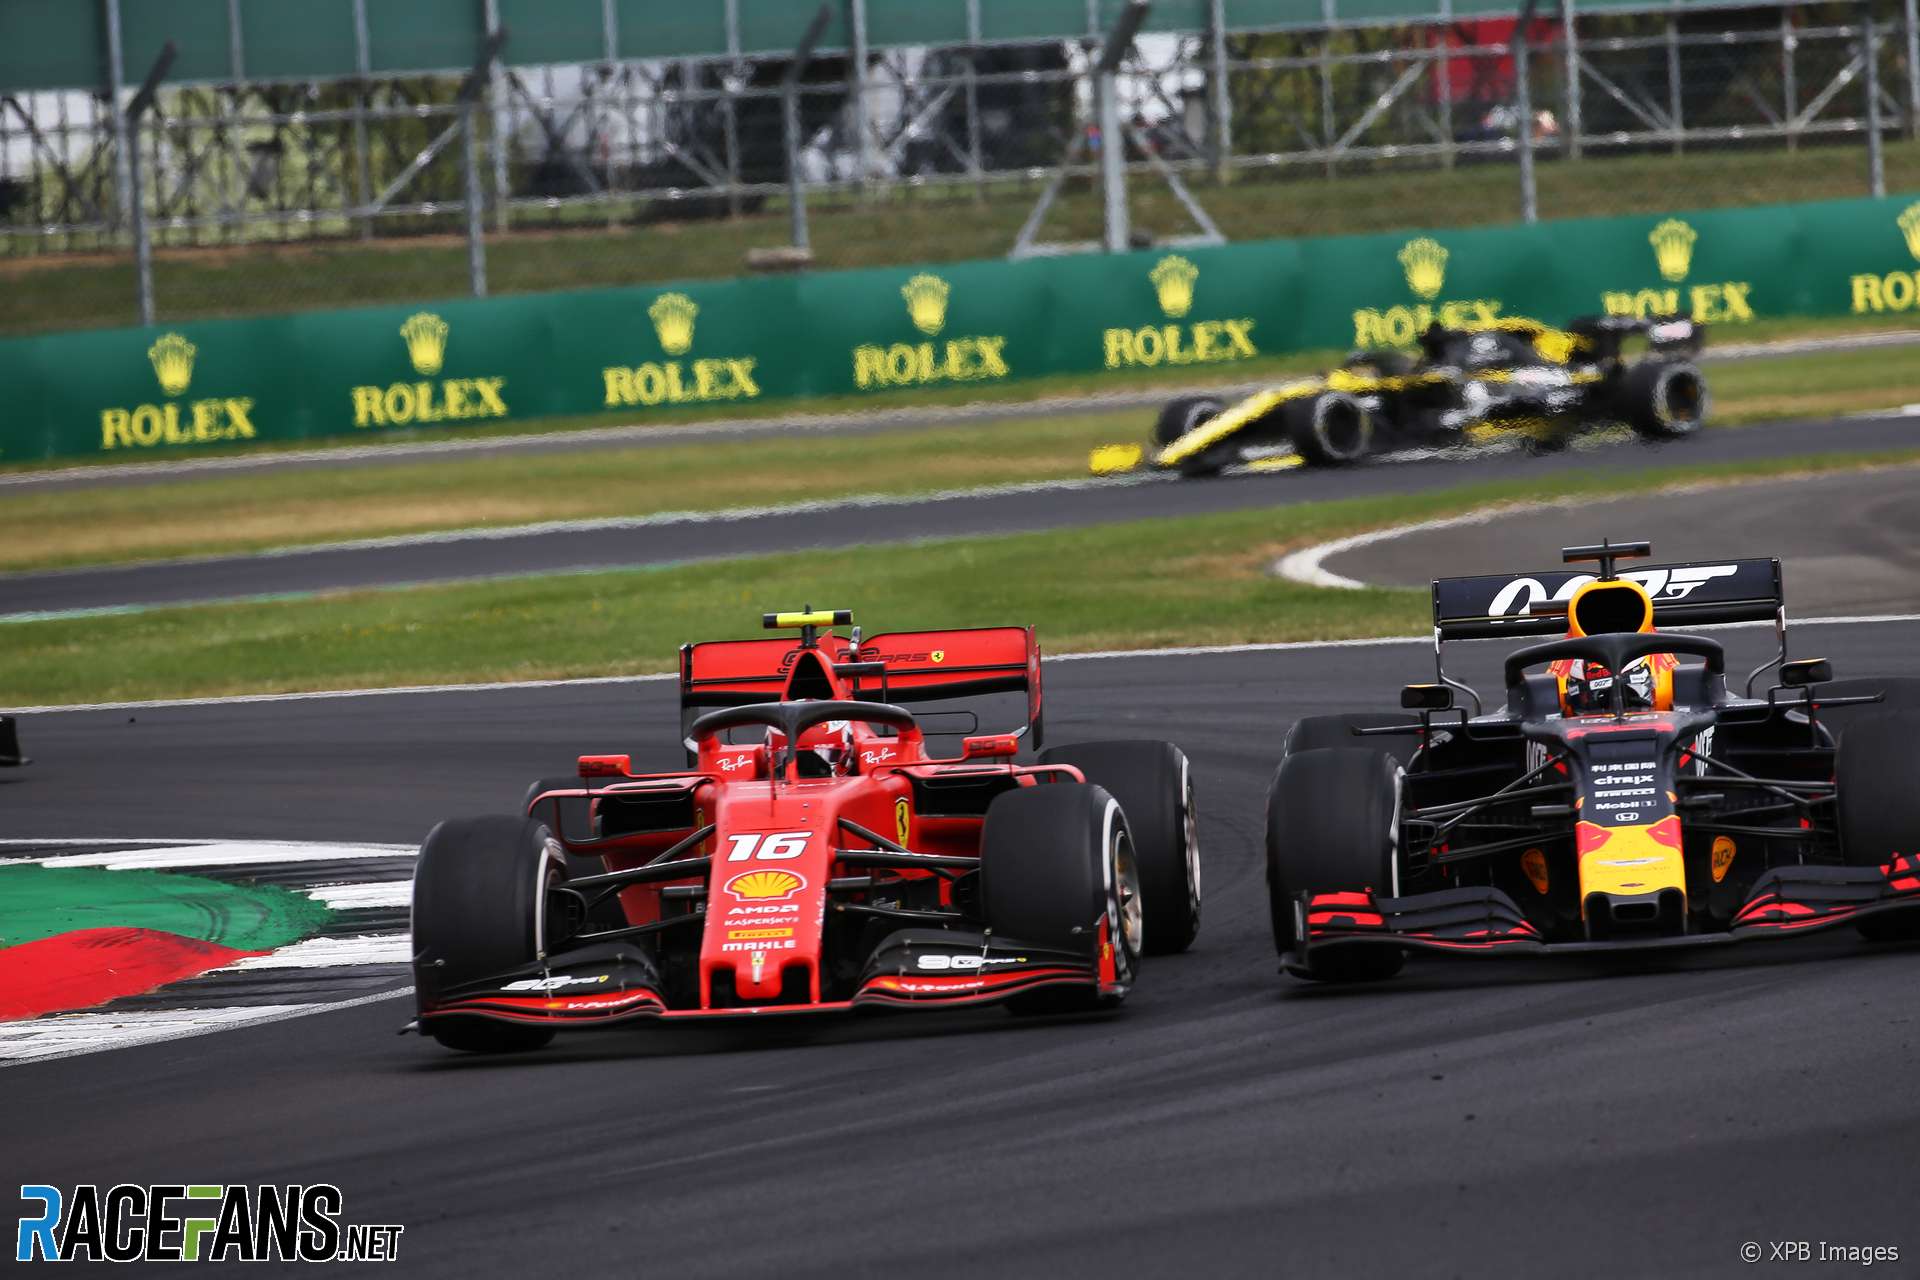 Leclerc: “Nothing personal” about fight with Verstappen